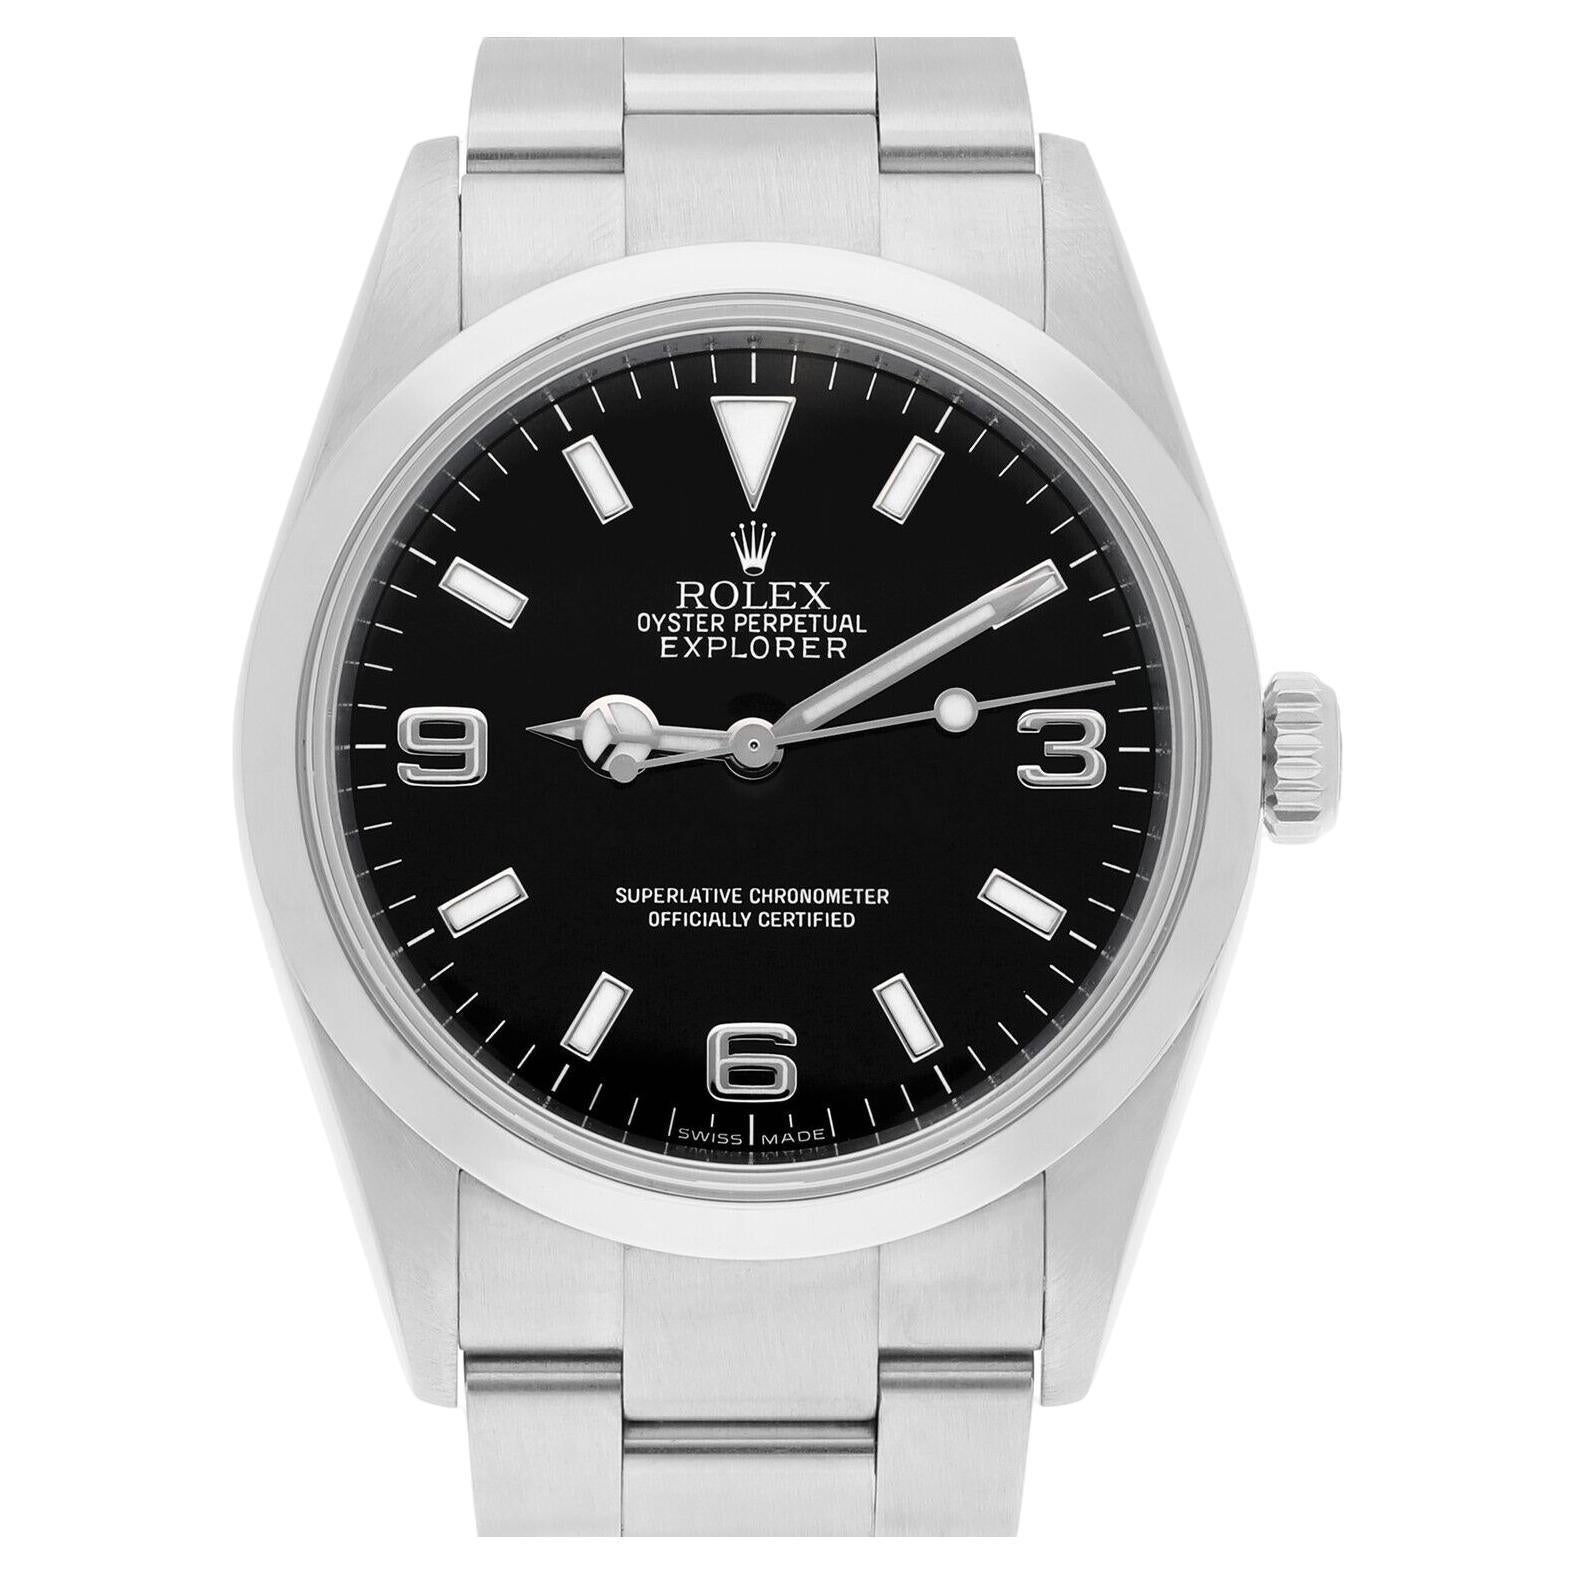 Rolex Explorer I Black 36mm 3-6-9 Stainless Steel Oyster Watch 114270 MINT